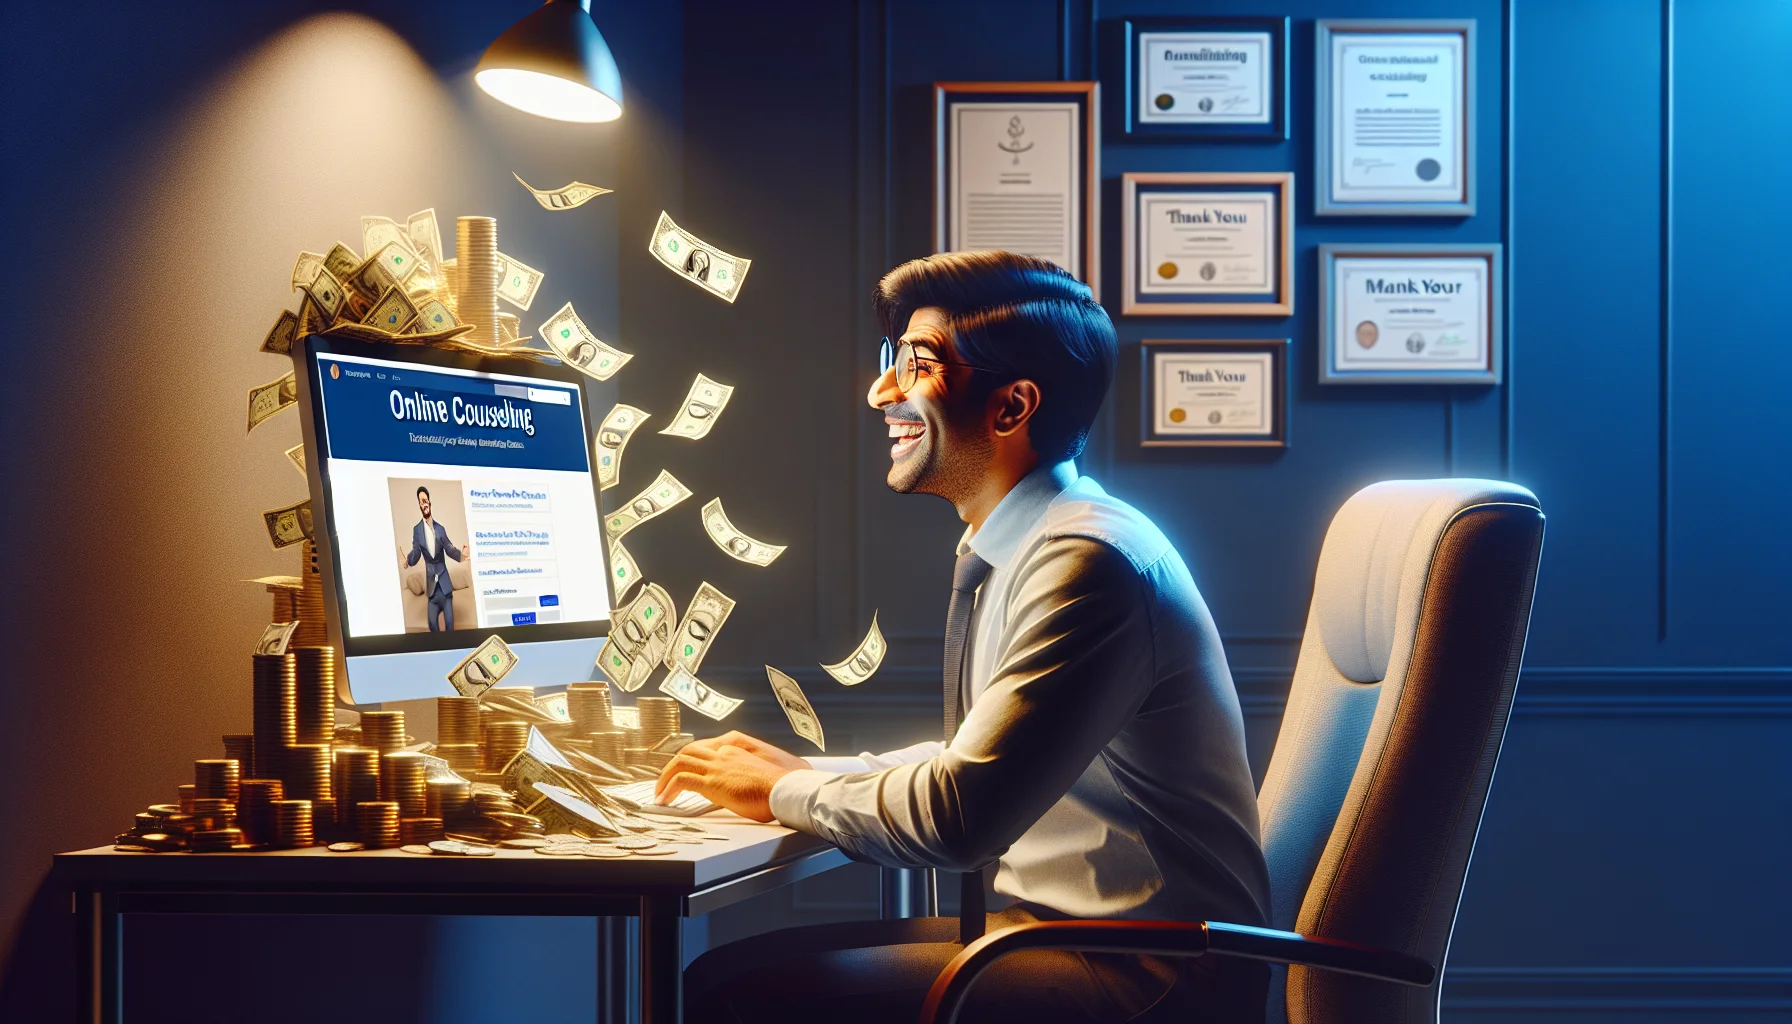 Imagine a scene where a cheerful individual, of South Asian descent and male gender, is seen sitting at a sleek modern workstation illuminated with soft light. The computer screen shows a website related to online counseling, indicating he's an affiliate. Piles of gold coins and dollar bills are humorously overflowing from the computer screen. The walls of the room are adorned with certificates of recognition and thank you notes, depicting the successful affiliate journey. The expression on the individual's face is gleaming with satisfaction and certainty, amplifying the humor and realism of making a living online.